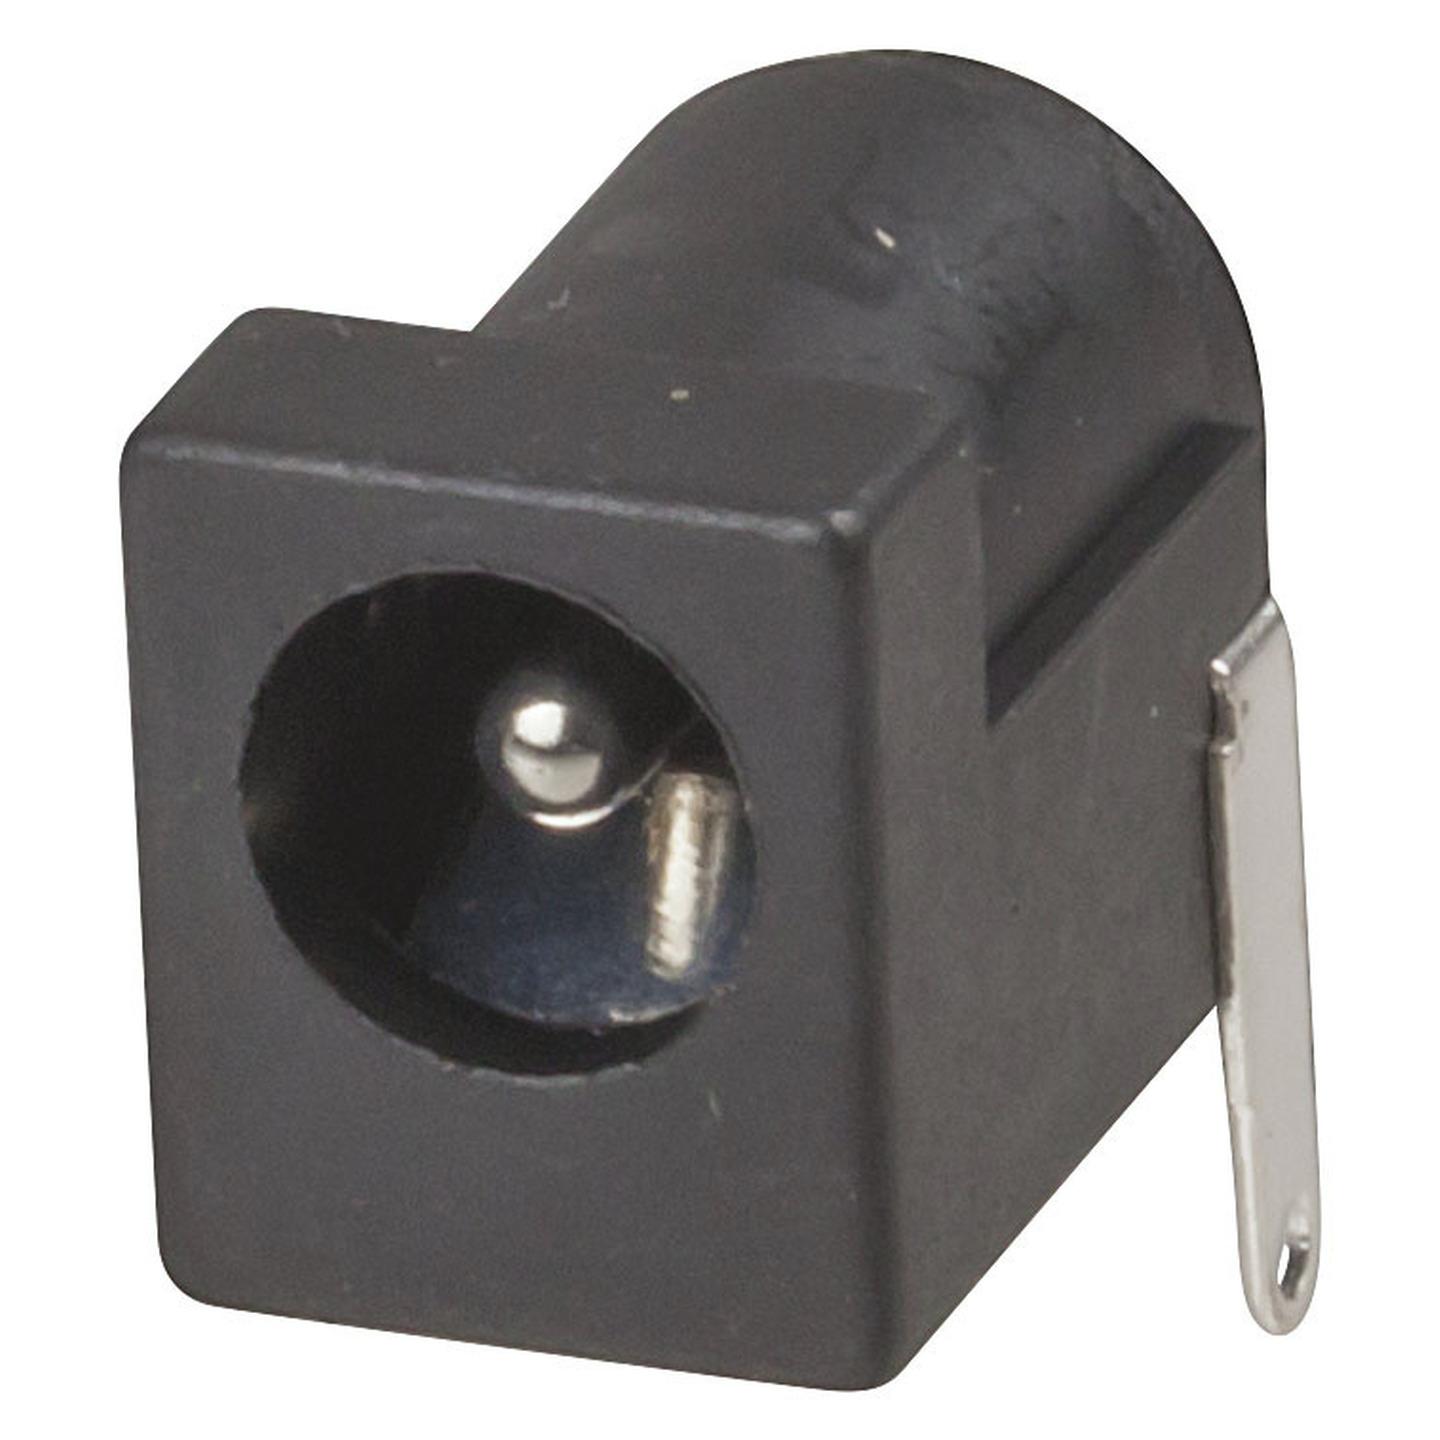 2.1mm PC Mount Male DC Power Connector